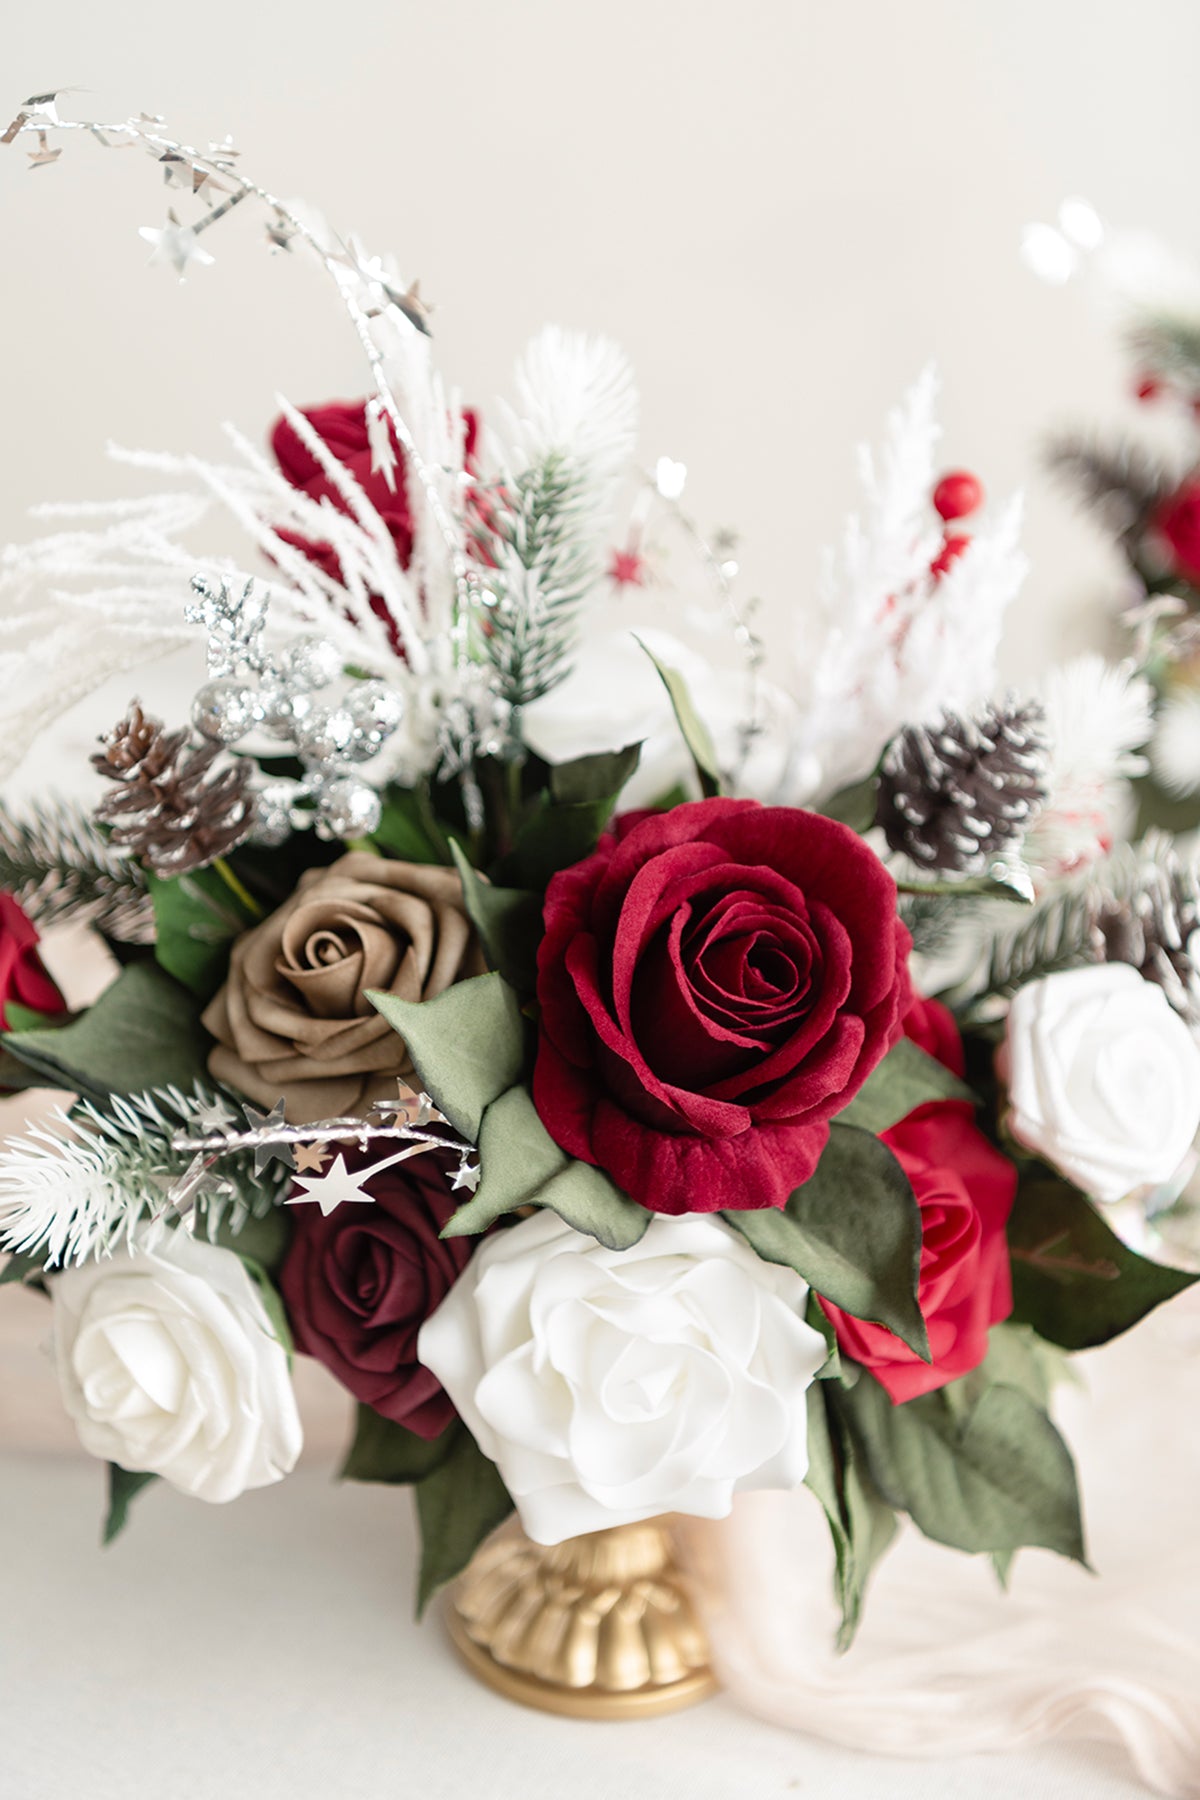 Large Floral Centerpiece Set in Christmas Red & Sparkle